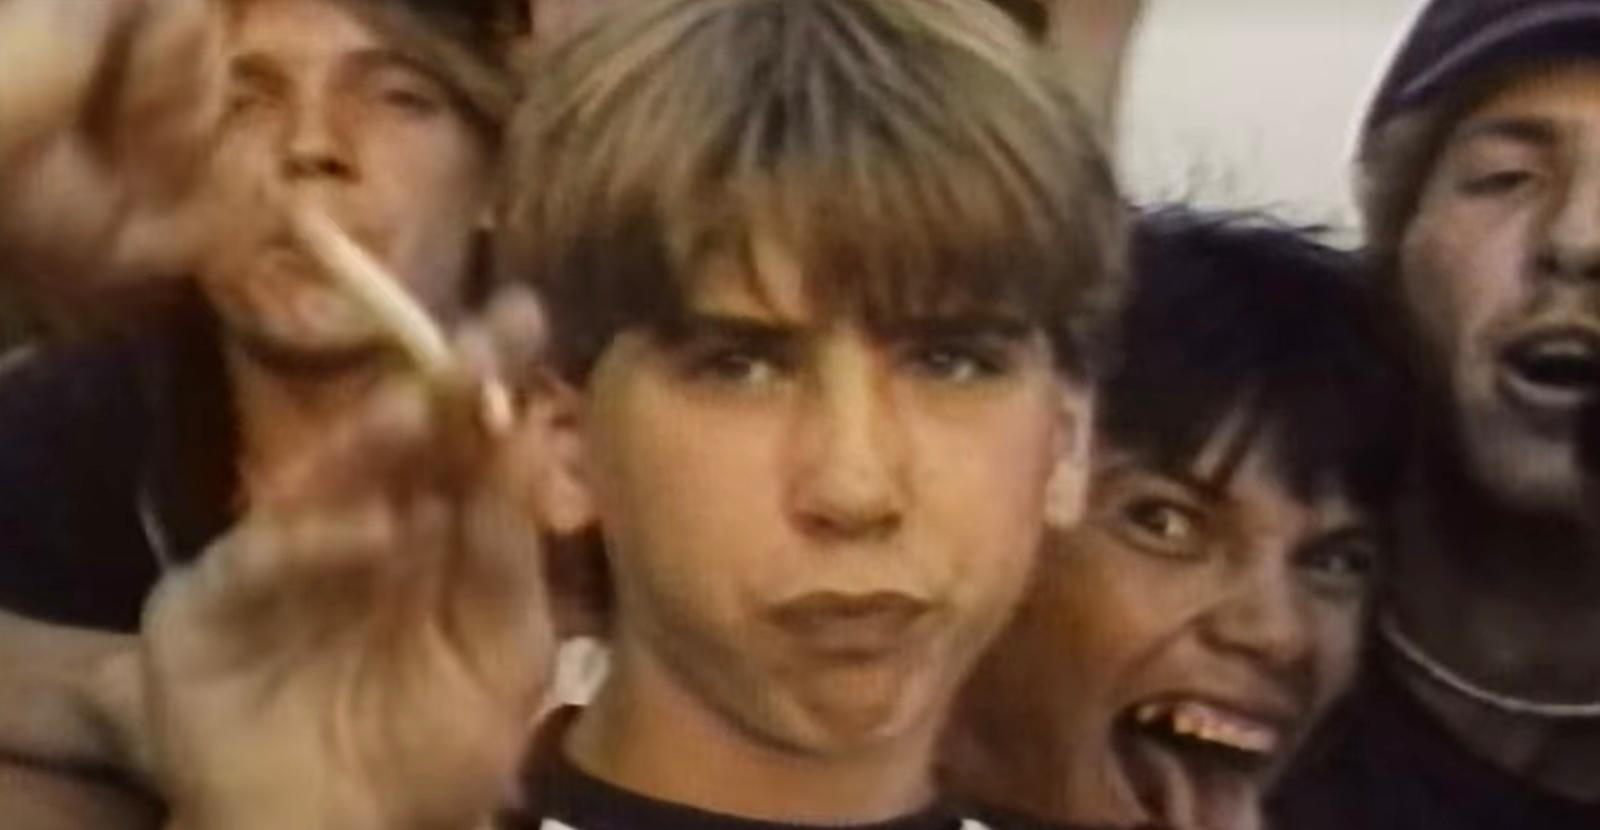 Still of teens in 80s from Netflix documentary Hell Camp: Teen Nightmare